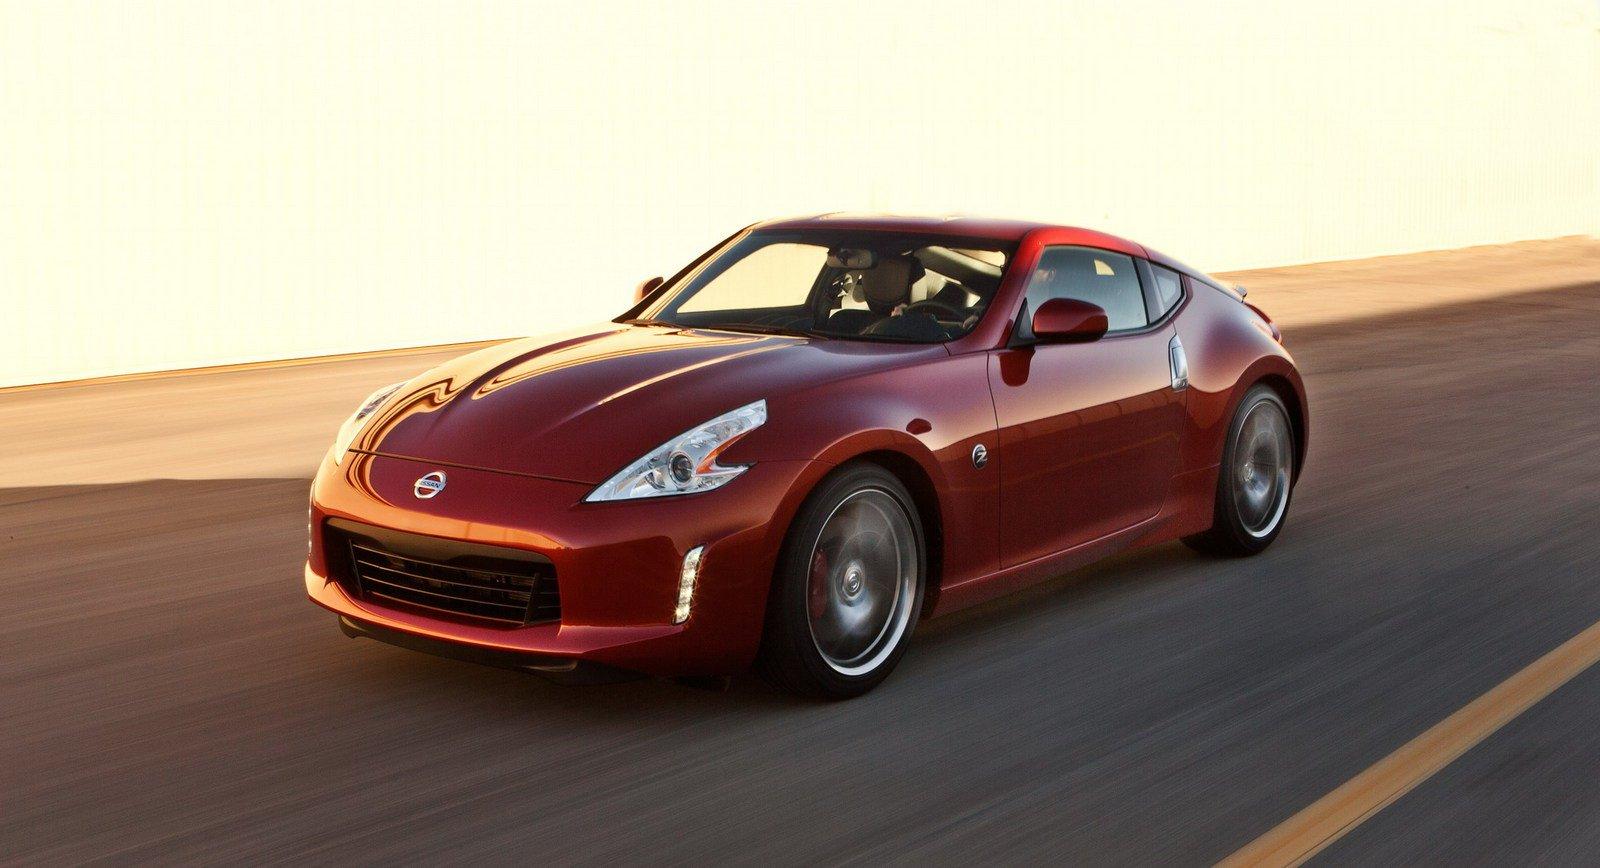 2017 Nissan 370Z Picture, Photo, Wallpaper And Video